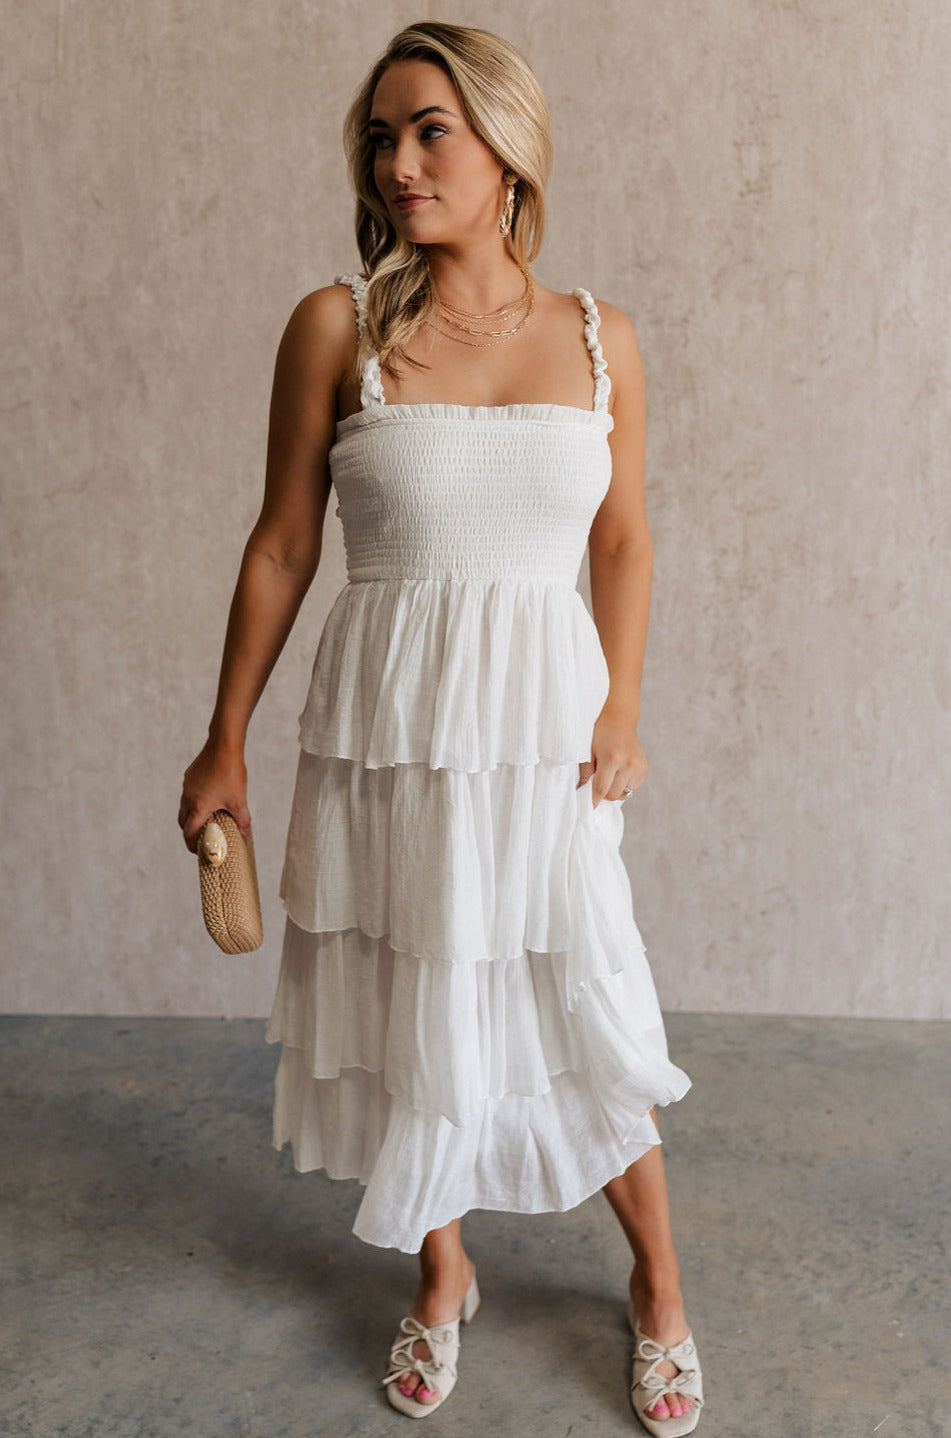 Full body view of female model wearing the Nova Smocked Tiered Midi Dress which features Lightweight Fabric, Fully Lined, Tiered Ruffle Body, Smocked Upper, Square Neckline and Elastic Straps.